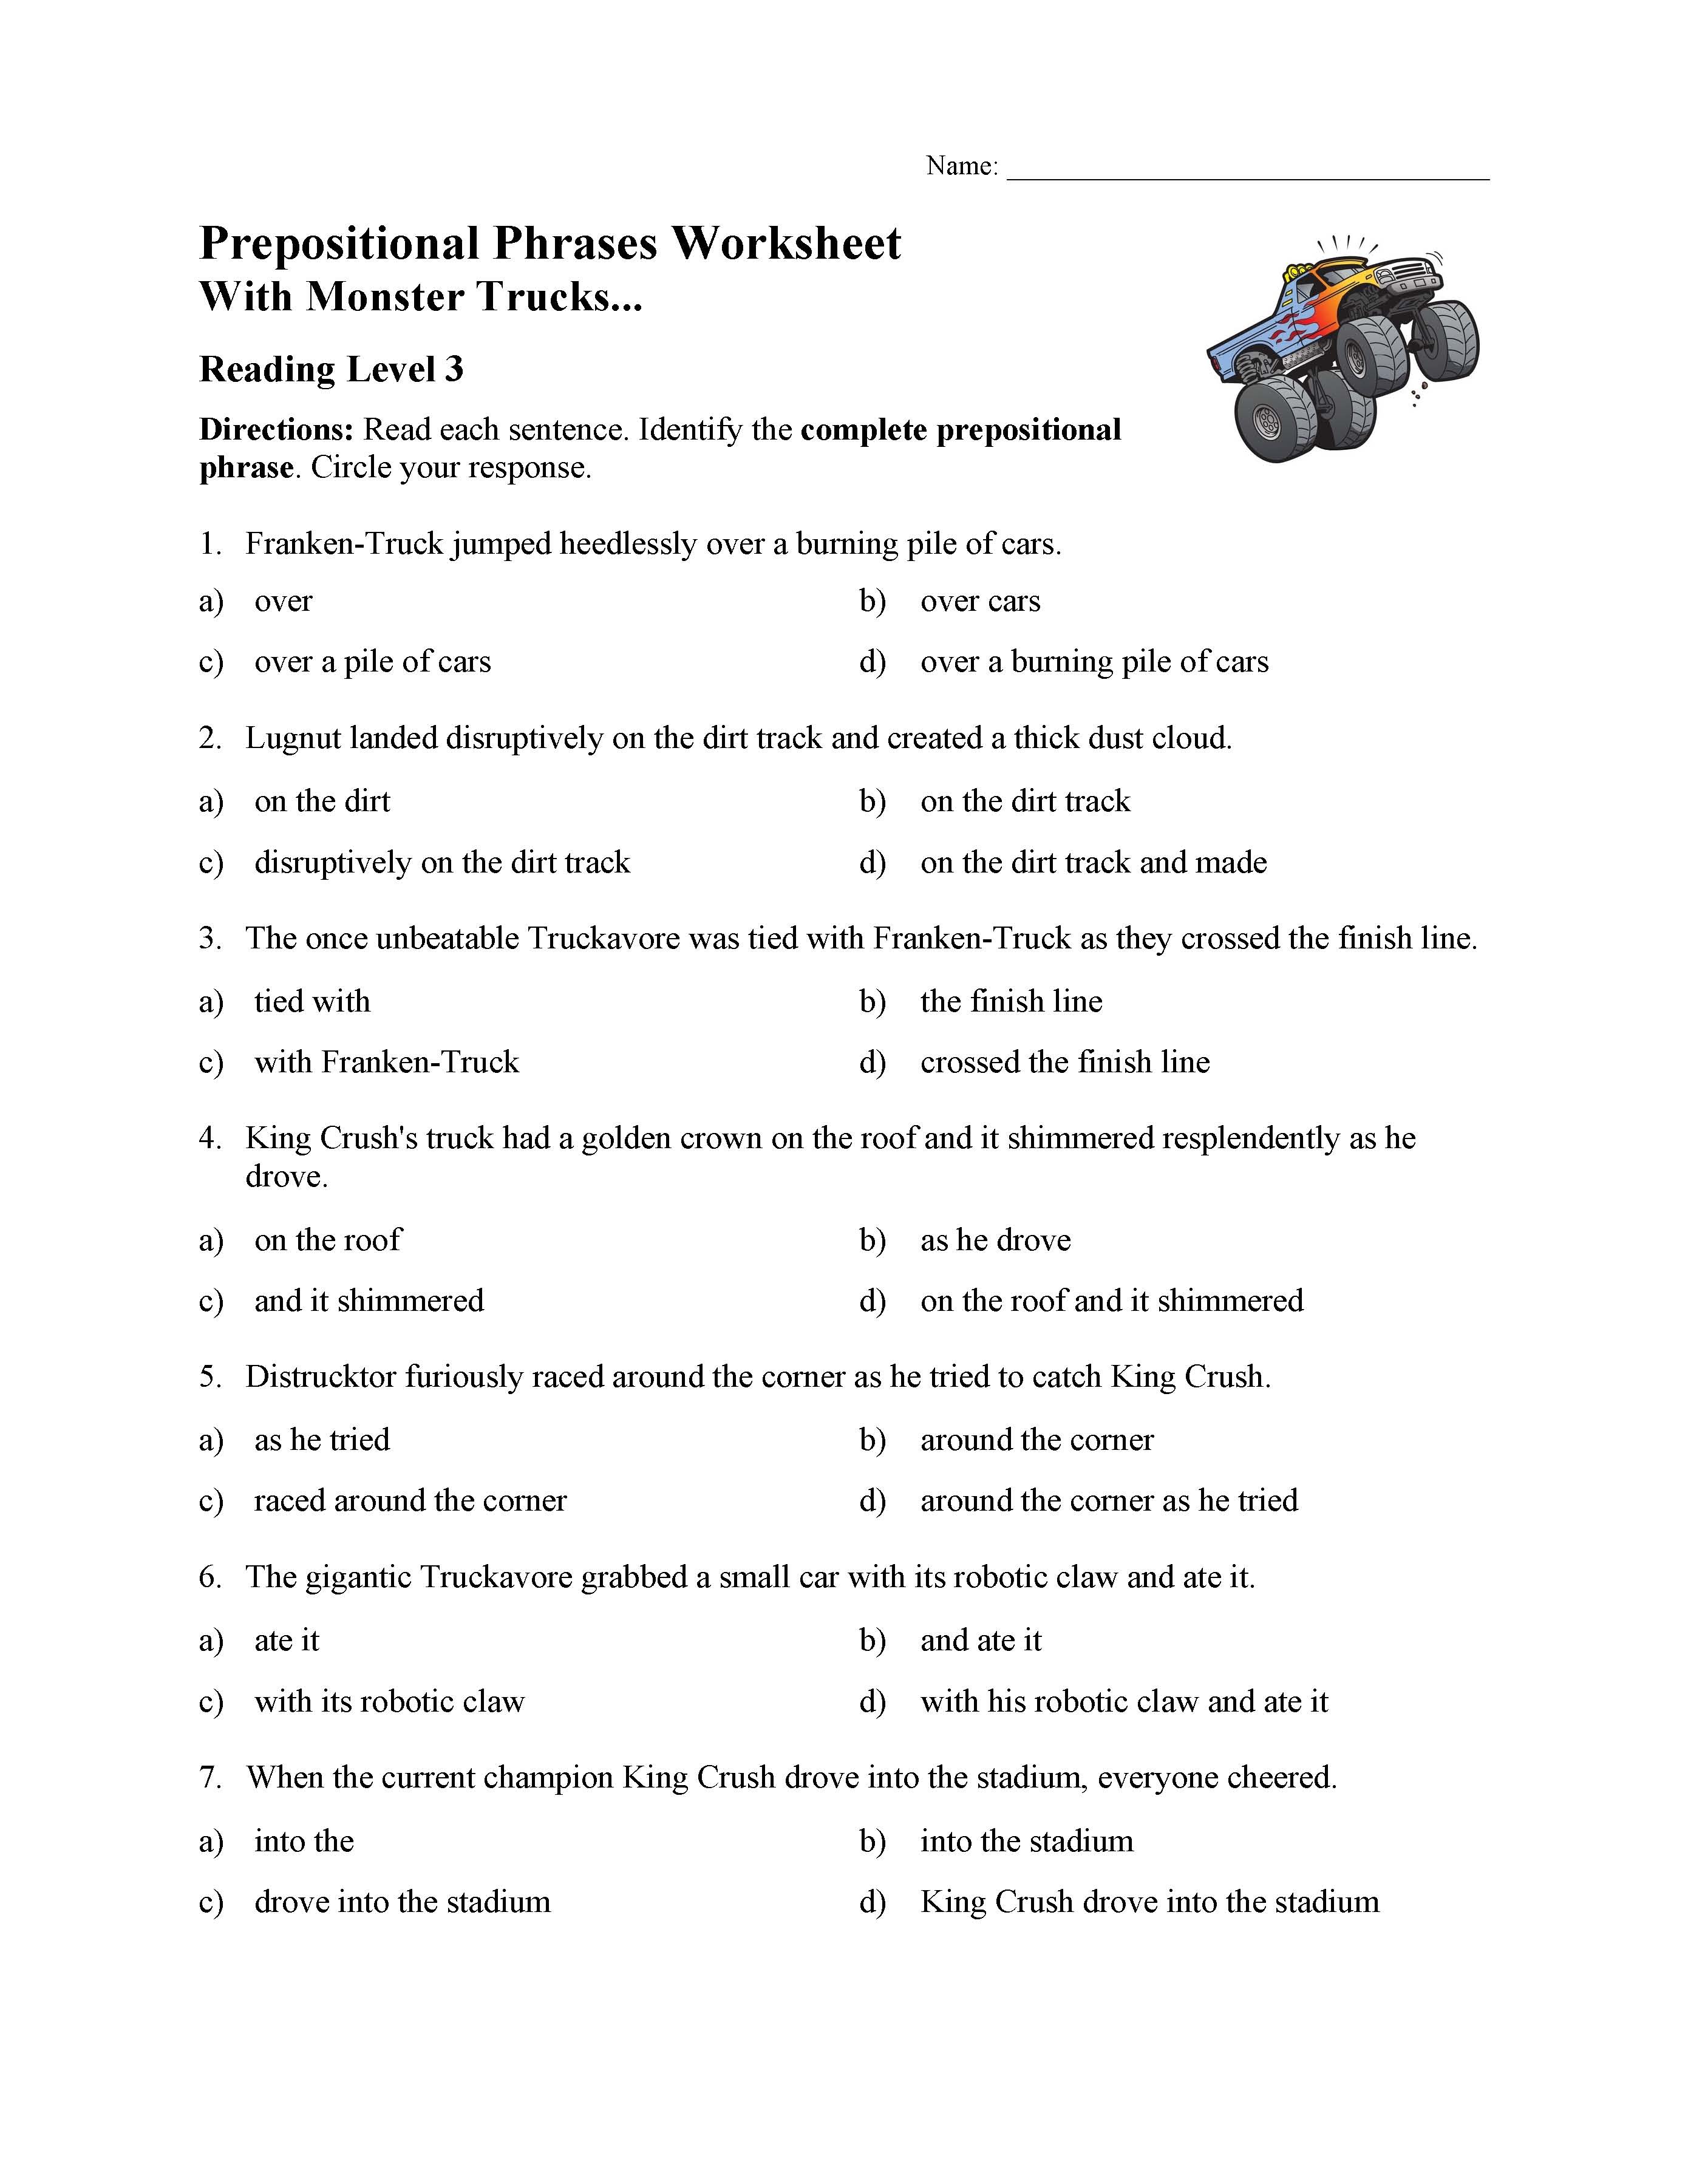 This is a preview image of the Prepositional Phrases Worksheet 1 - Reading Level 3.